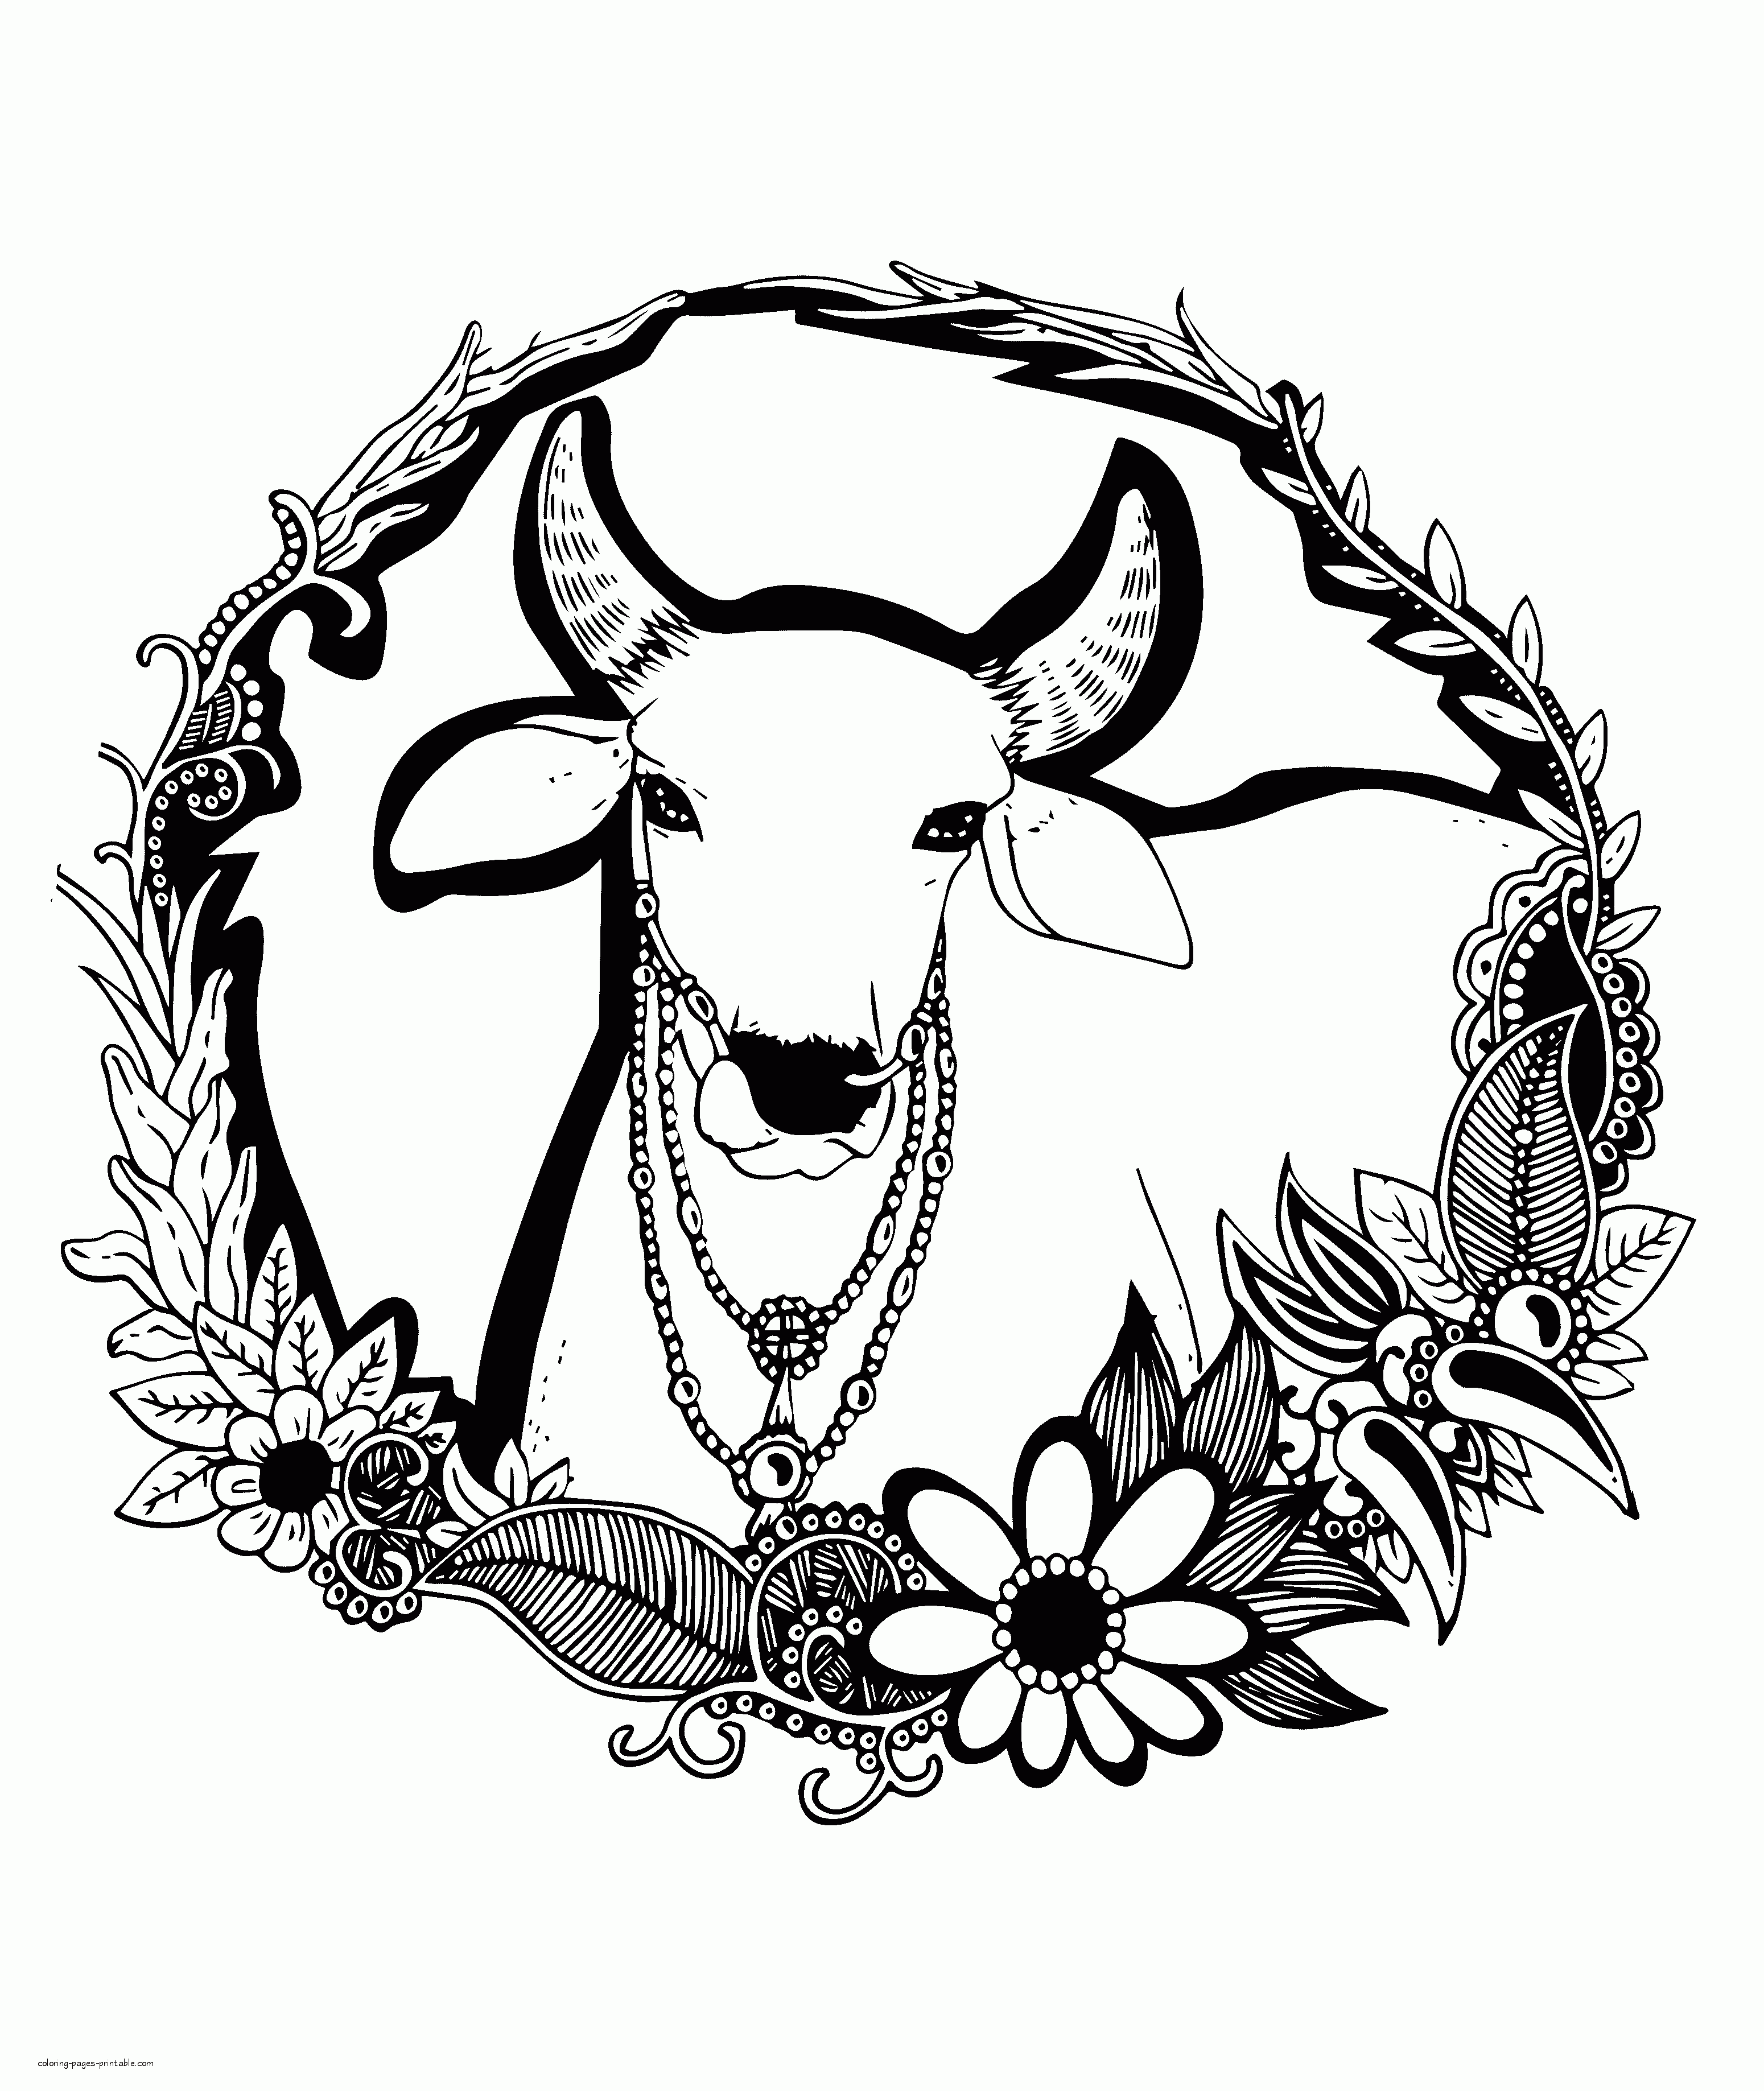 Download Cow Coloring Page For Adults || COLORING-PAGES-PRINTABLE.COM